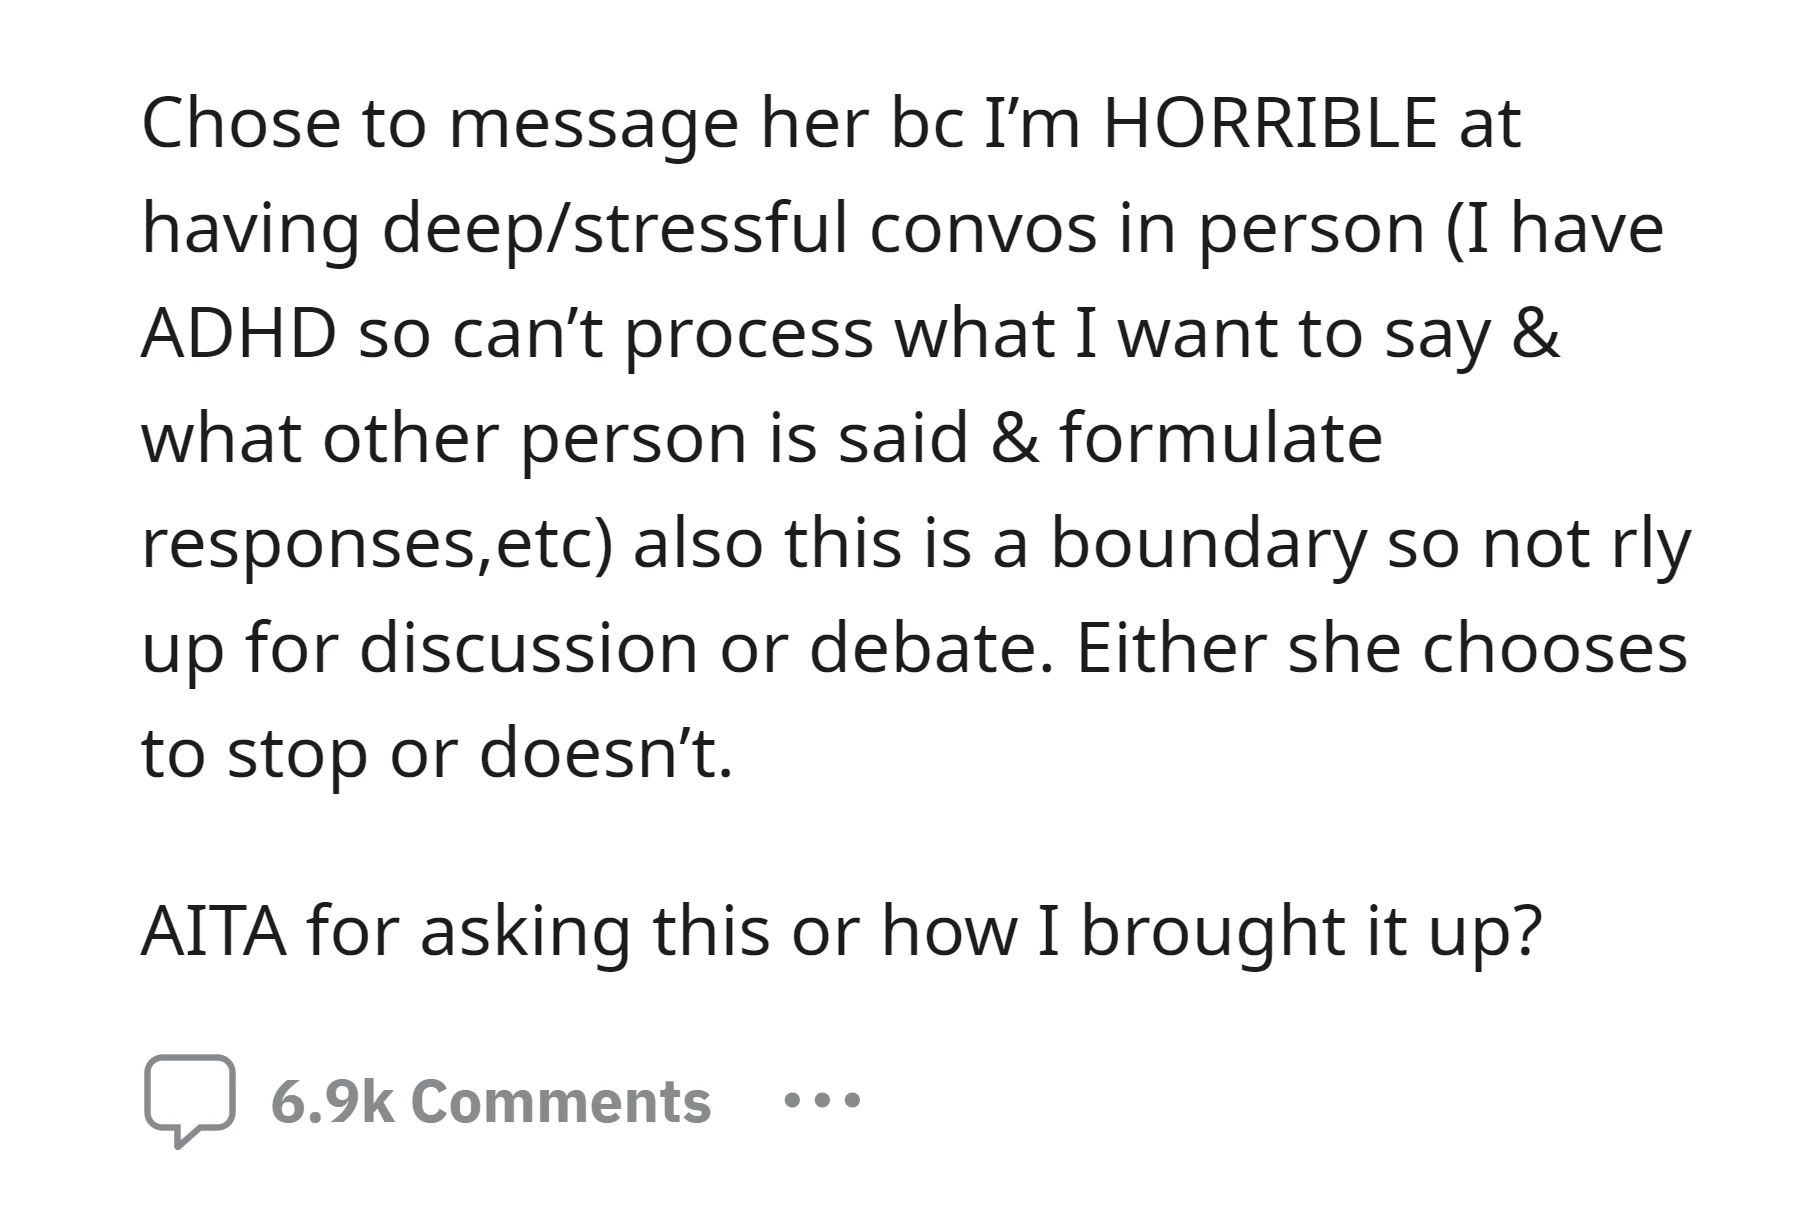 OP messaged her future mother-in-law about boundaries and expressed difficulty with in-person conversations